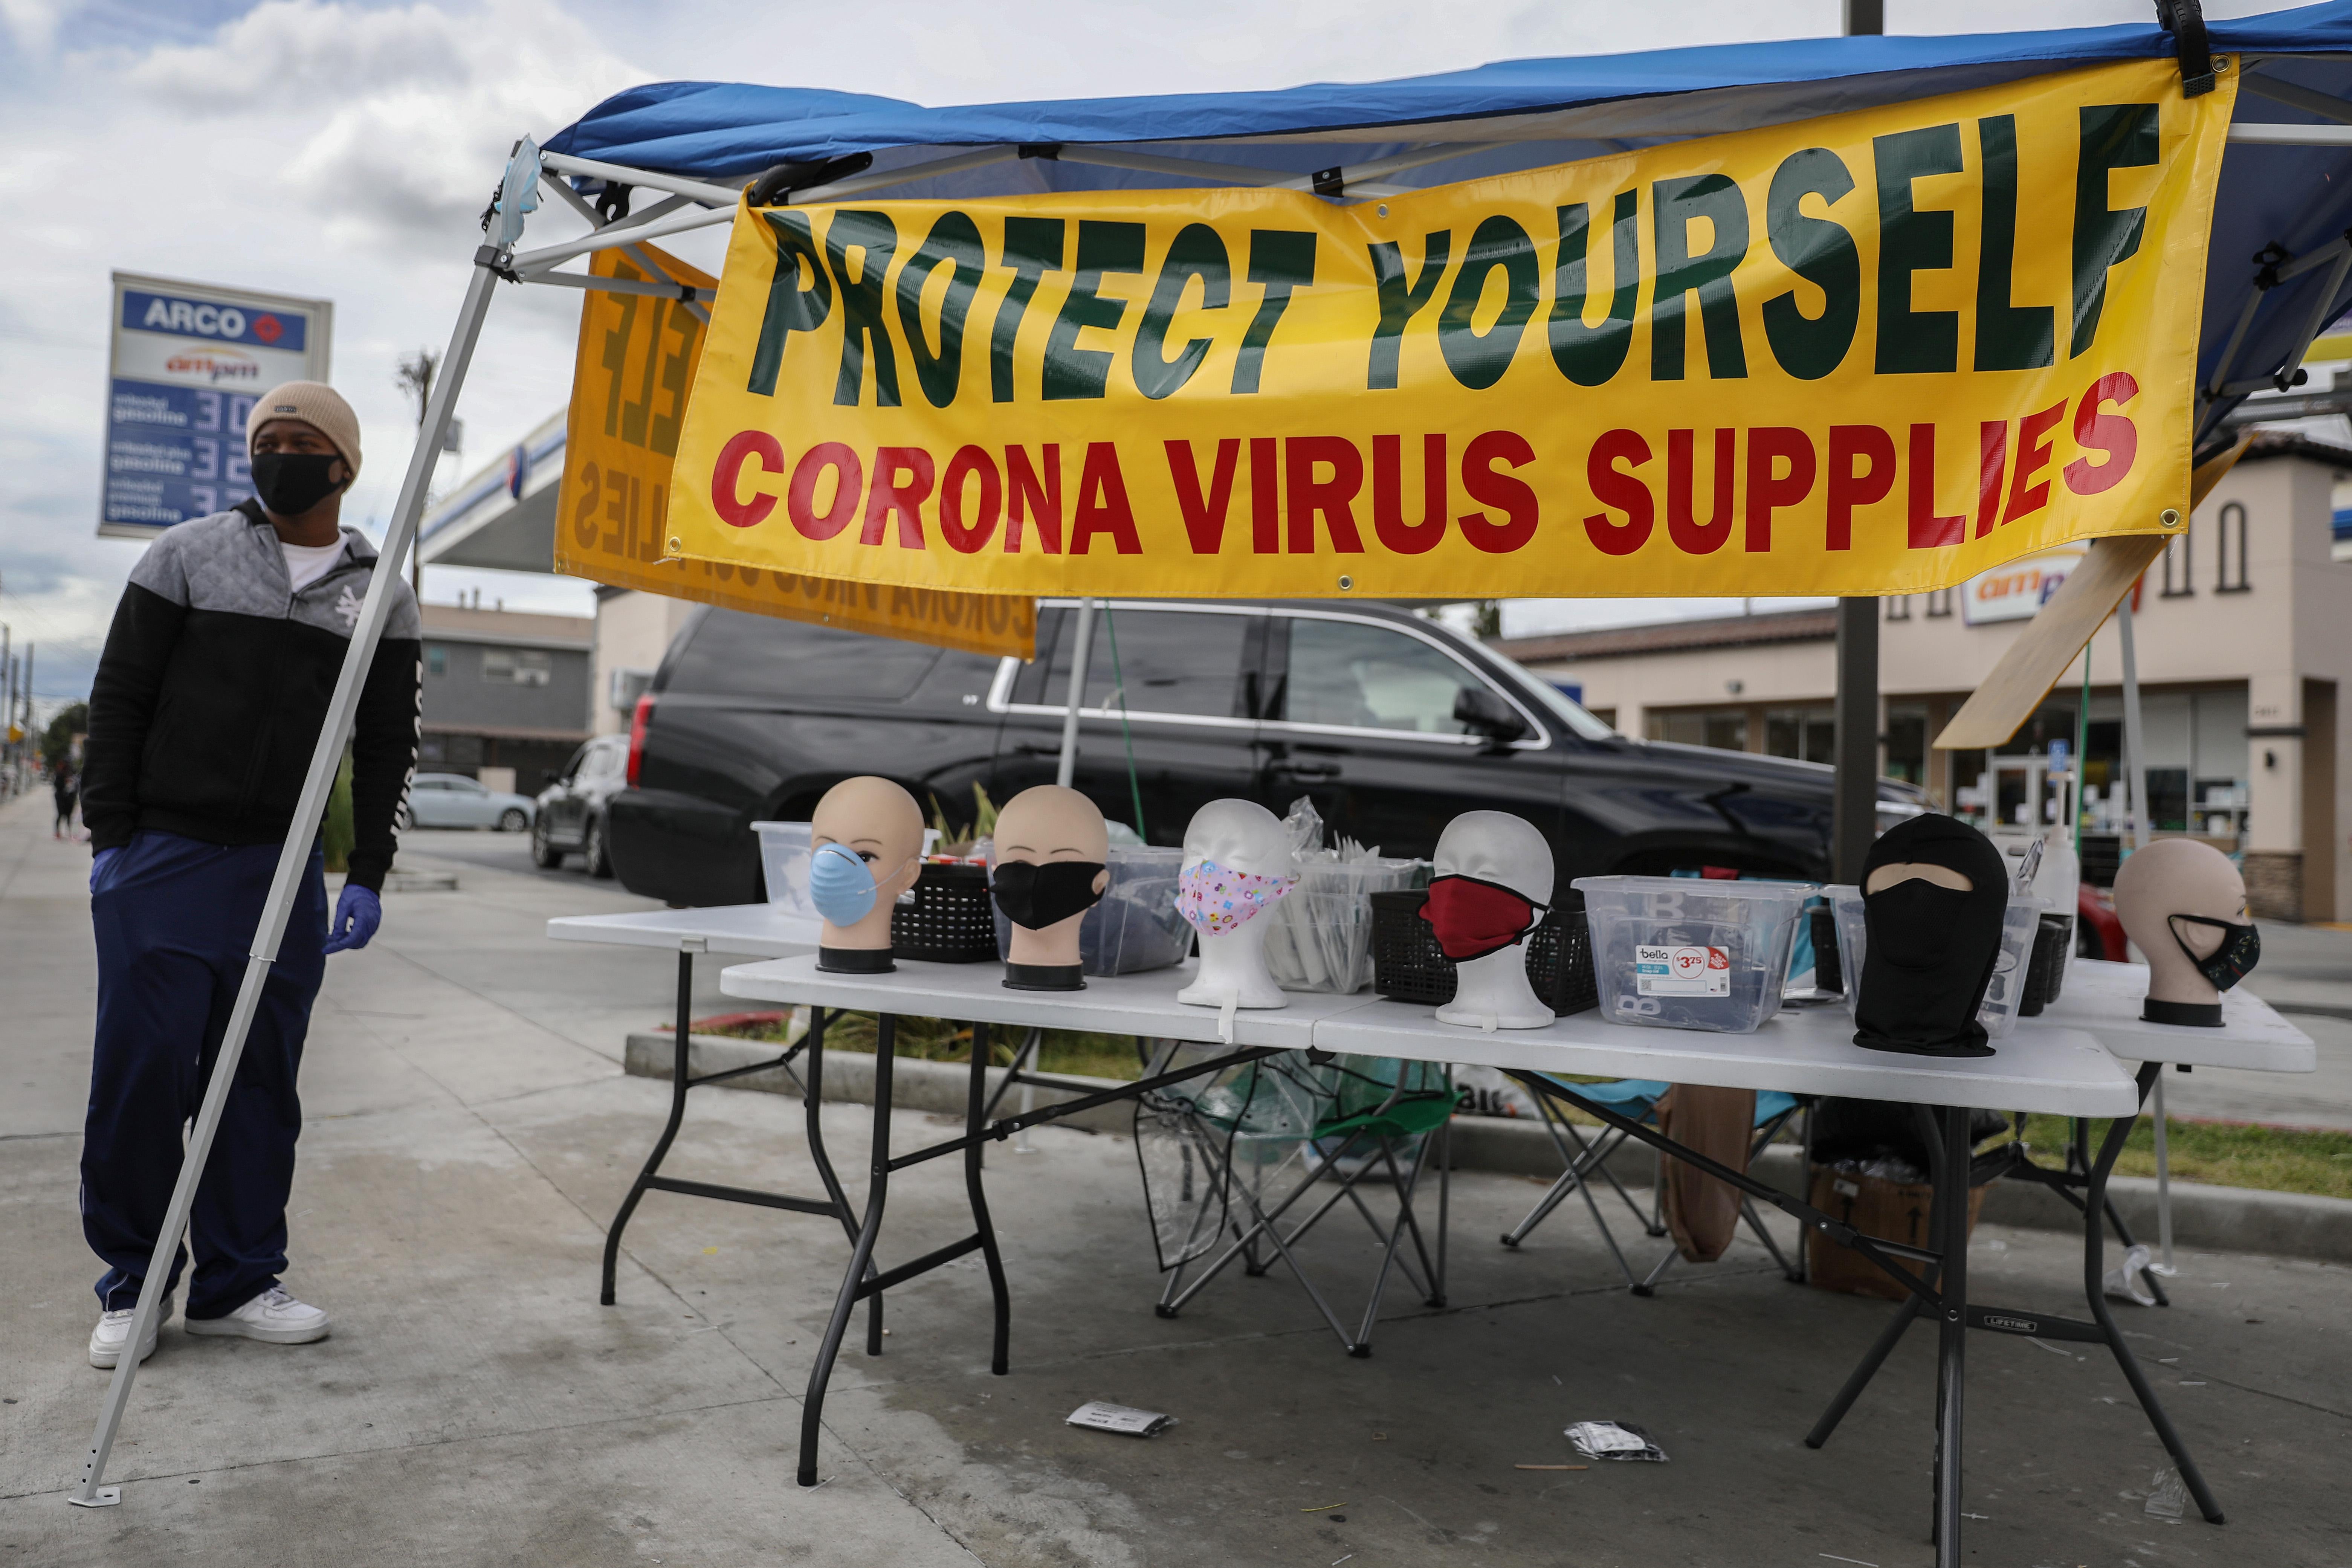 In a parking lot, a stand selling coronavirus supplies including face masks, with a sign that says "Protect Yourself"